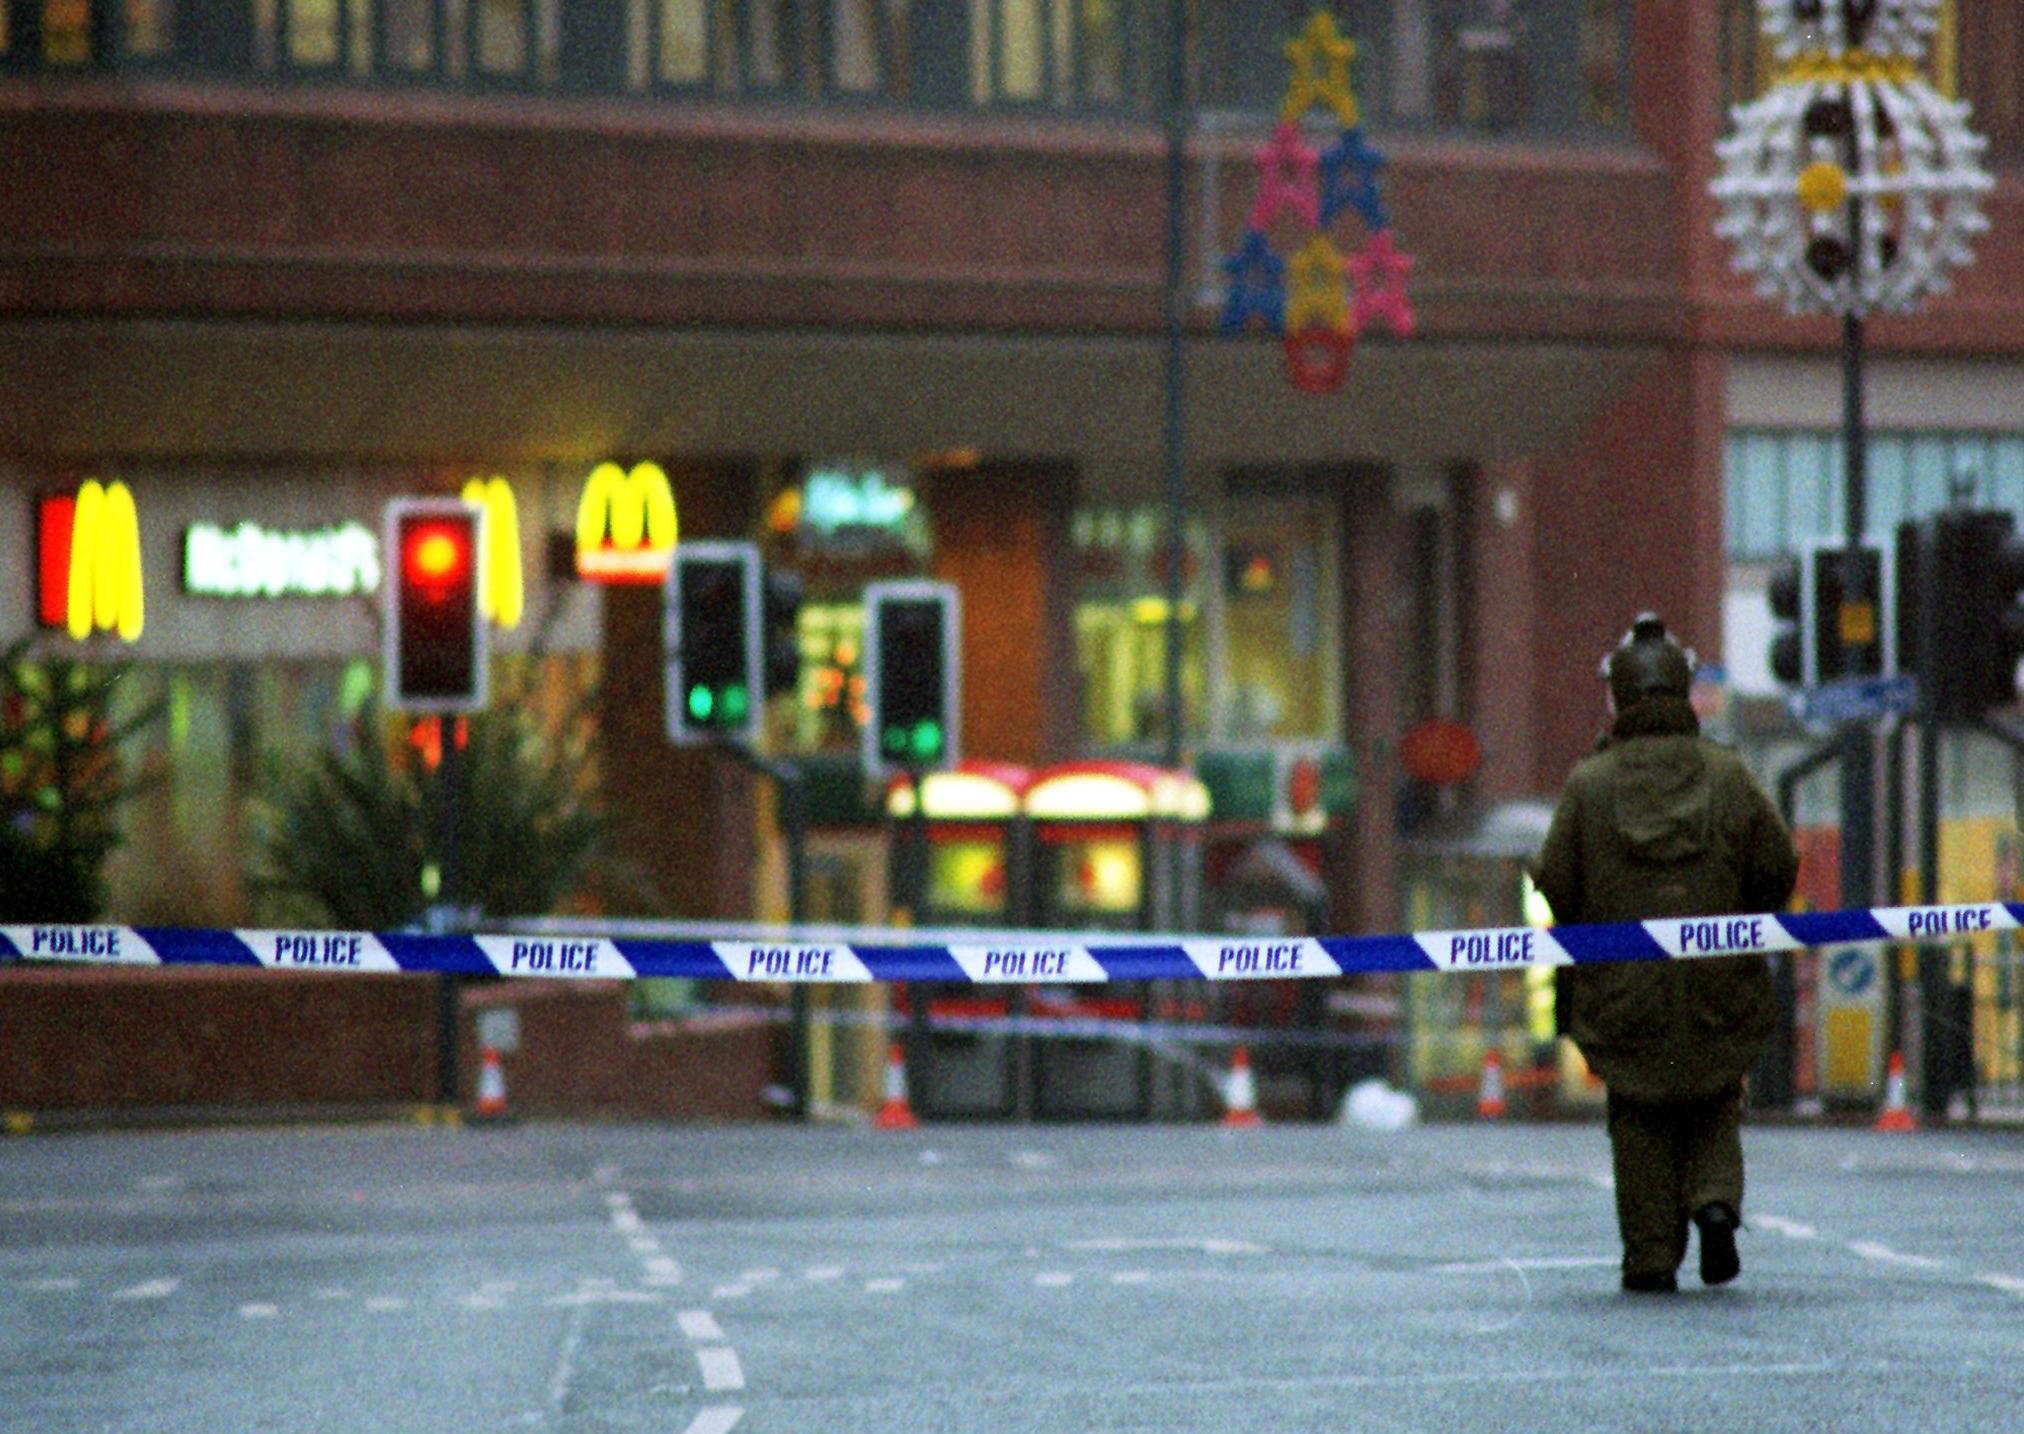 A bomb disposal officer makes his way through a cordon after a suspicious package was discovered at McDonald's in the St John's Centre.